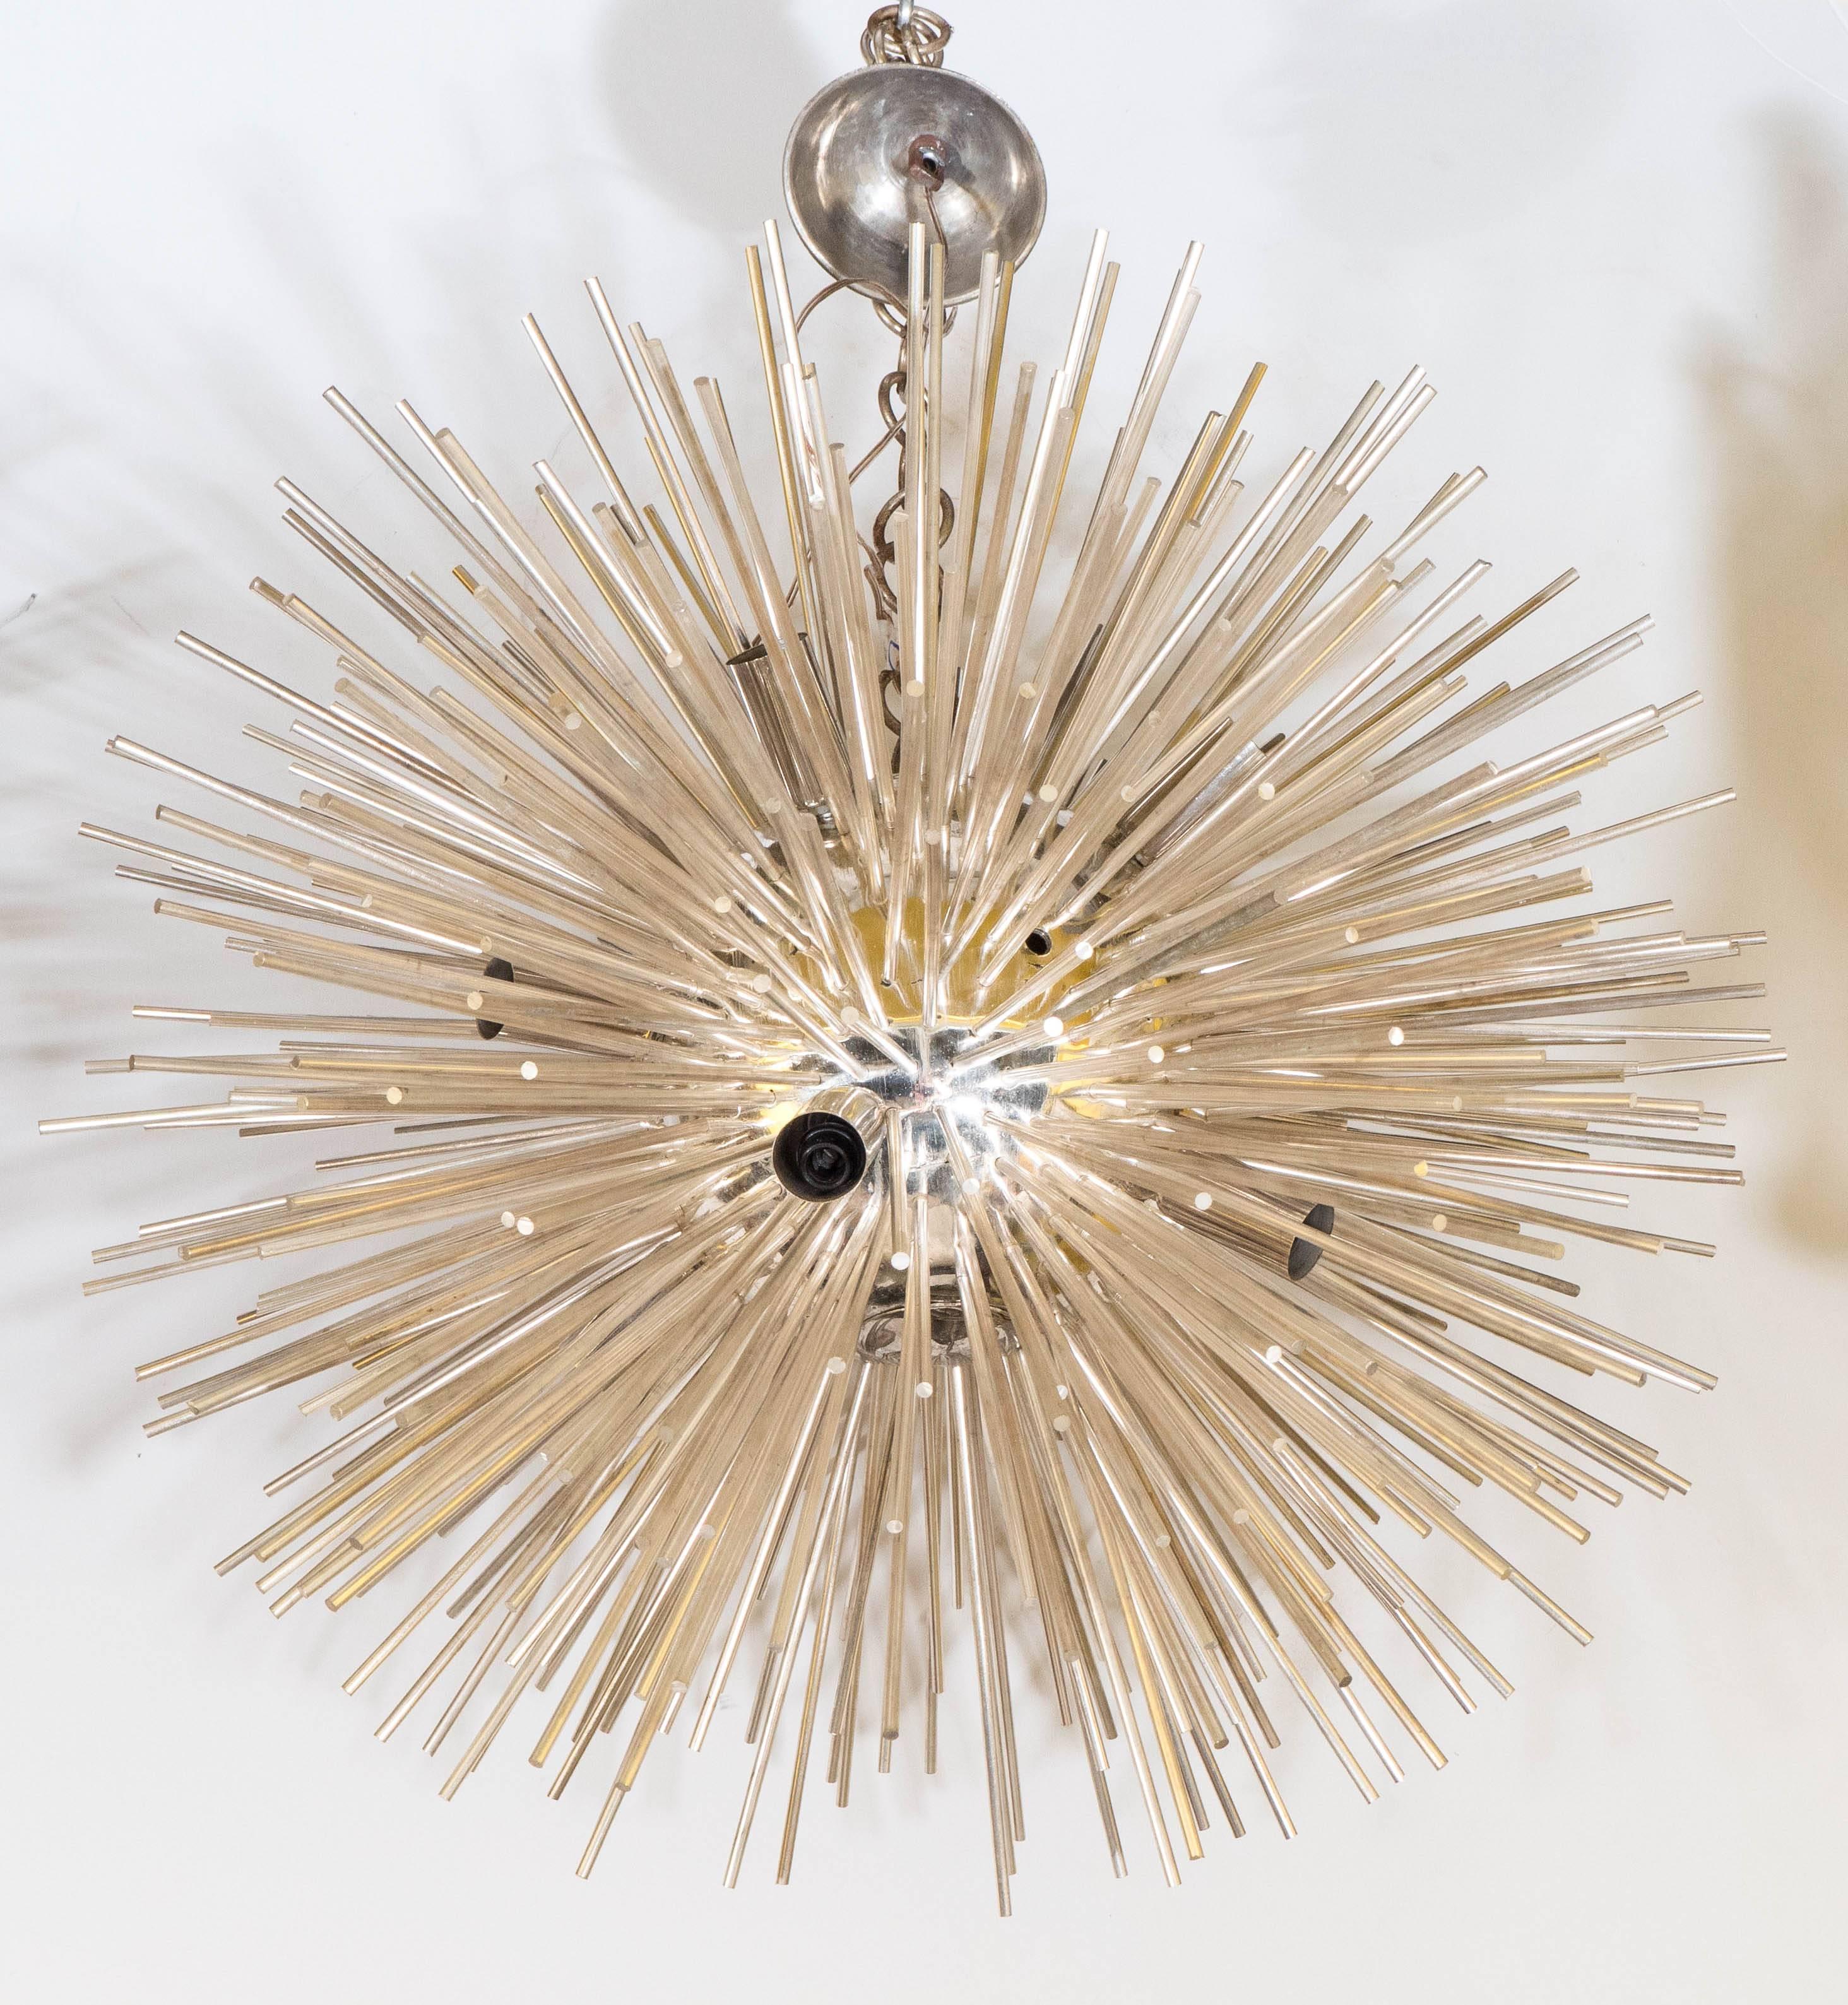 This highly modernistic Italian Sputnik chandelier, includes stunning silvered rods, radiating from a central nucleus, suspended from a circular ceiling plate. Very good condition, any present wear consistent with age and use; provided dimensions